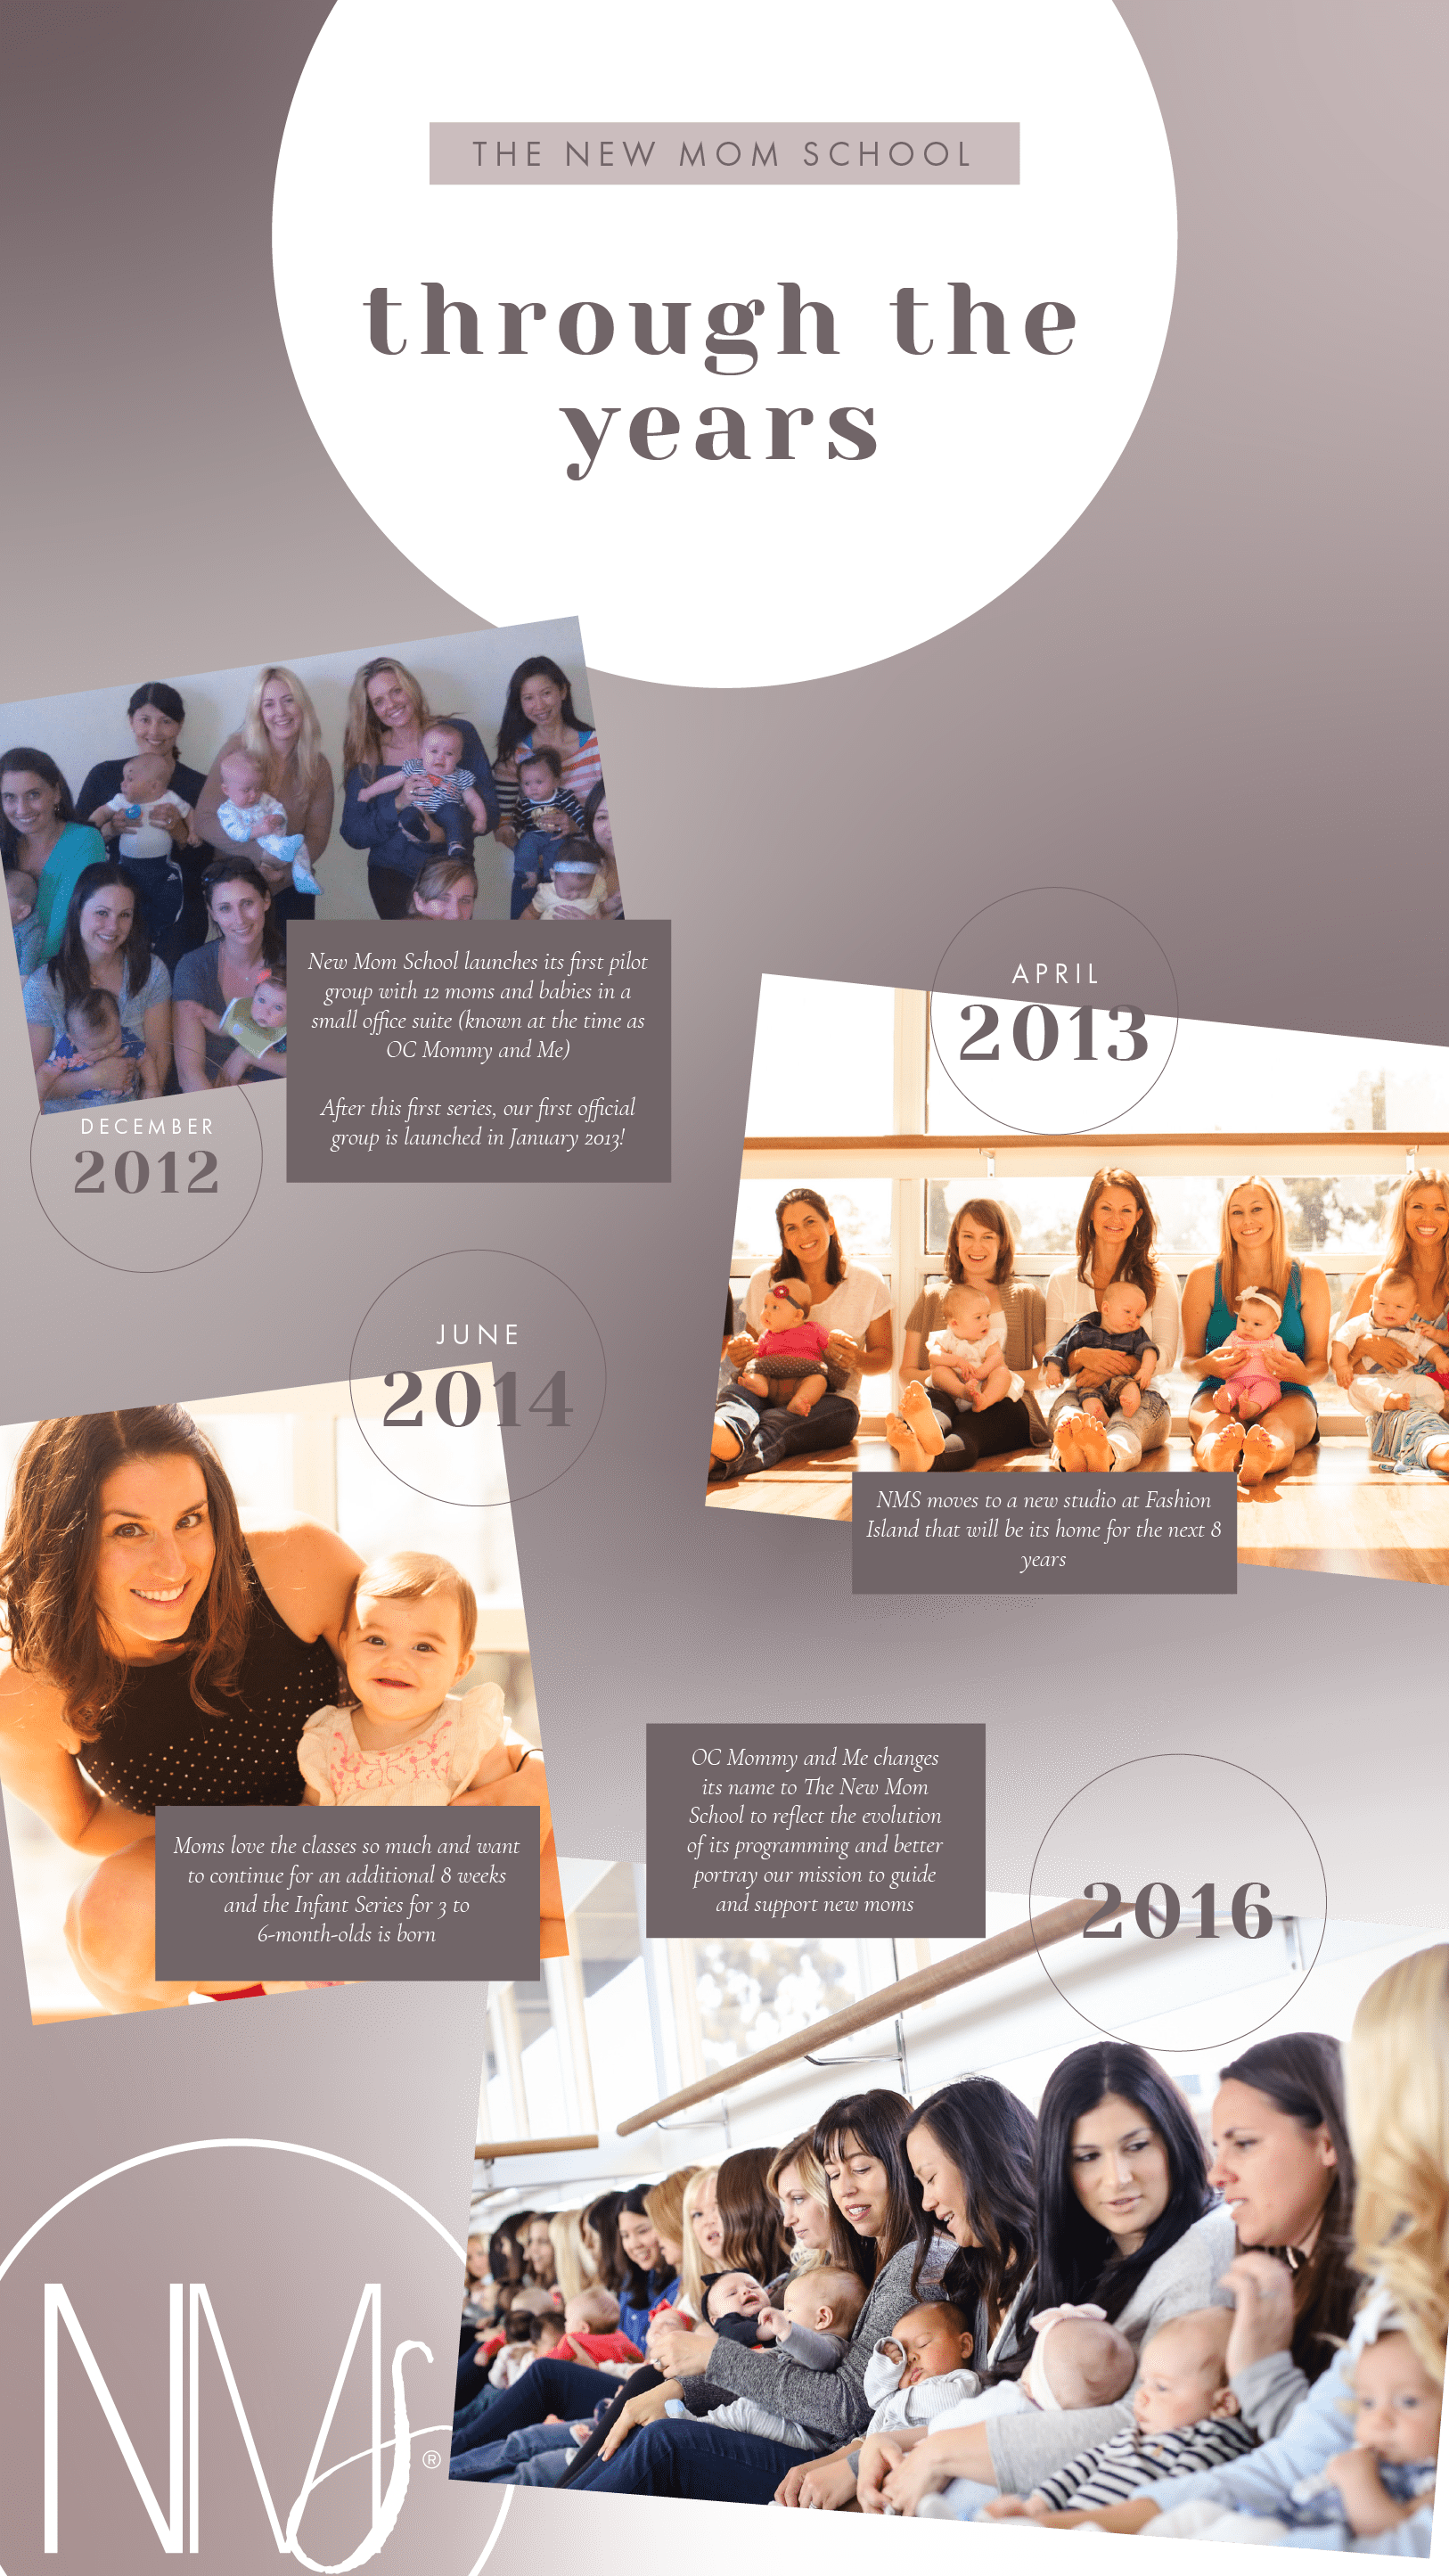 the new mom schoolthrough the
years